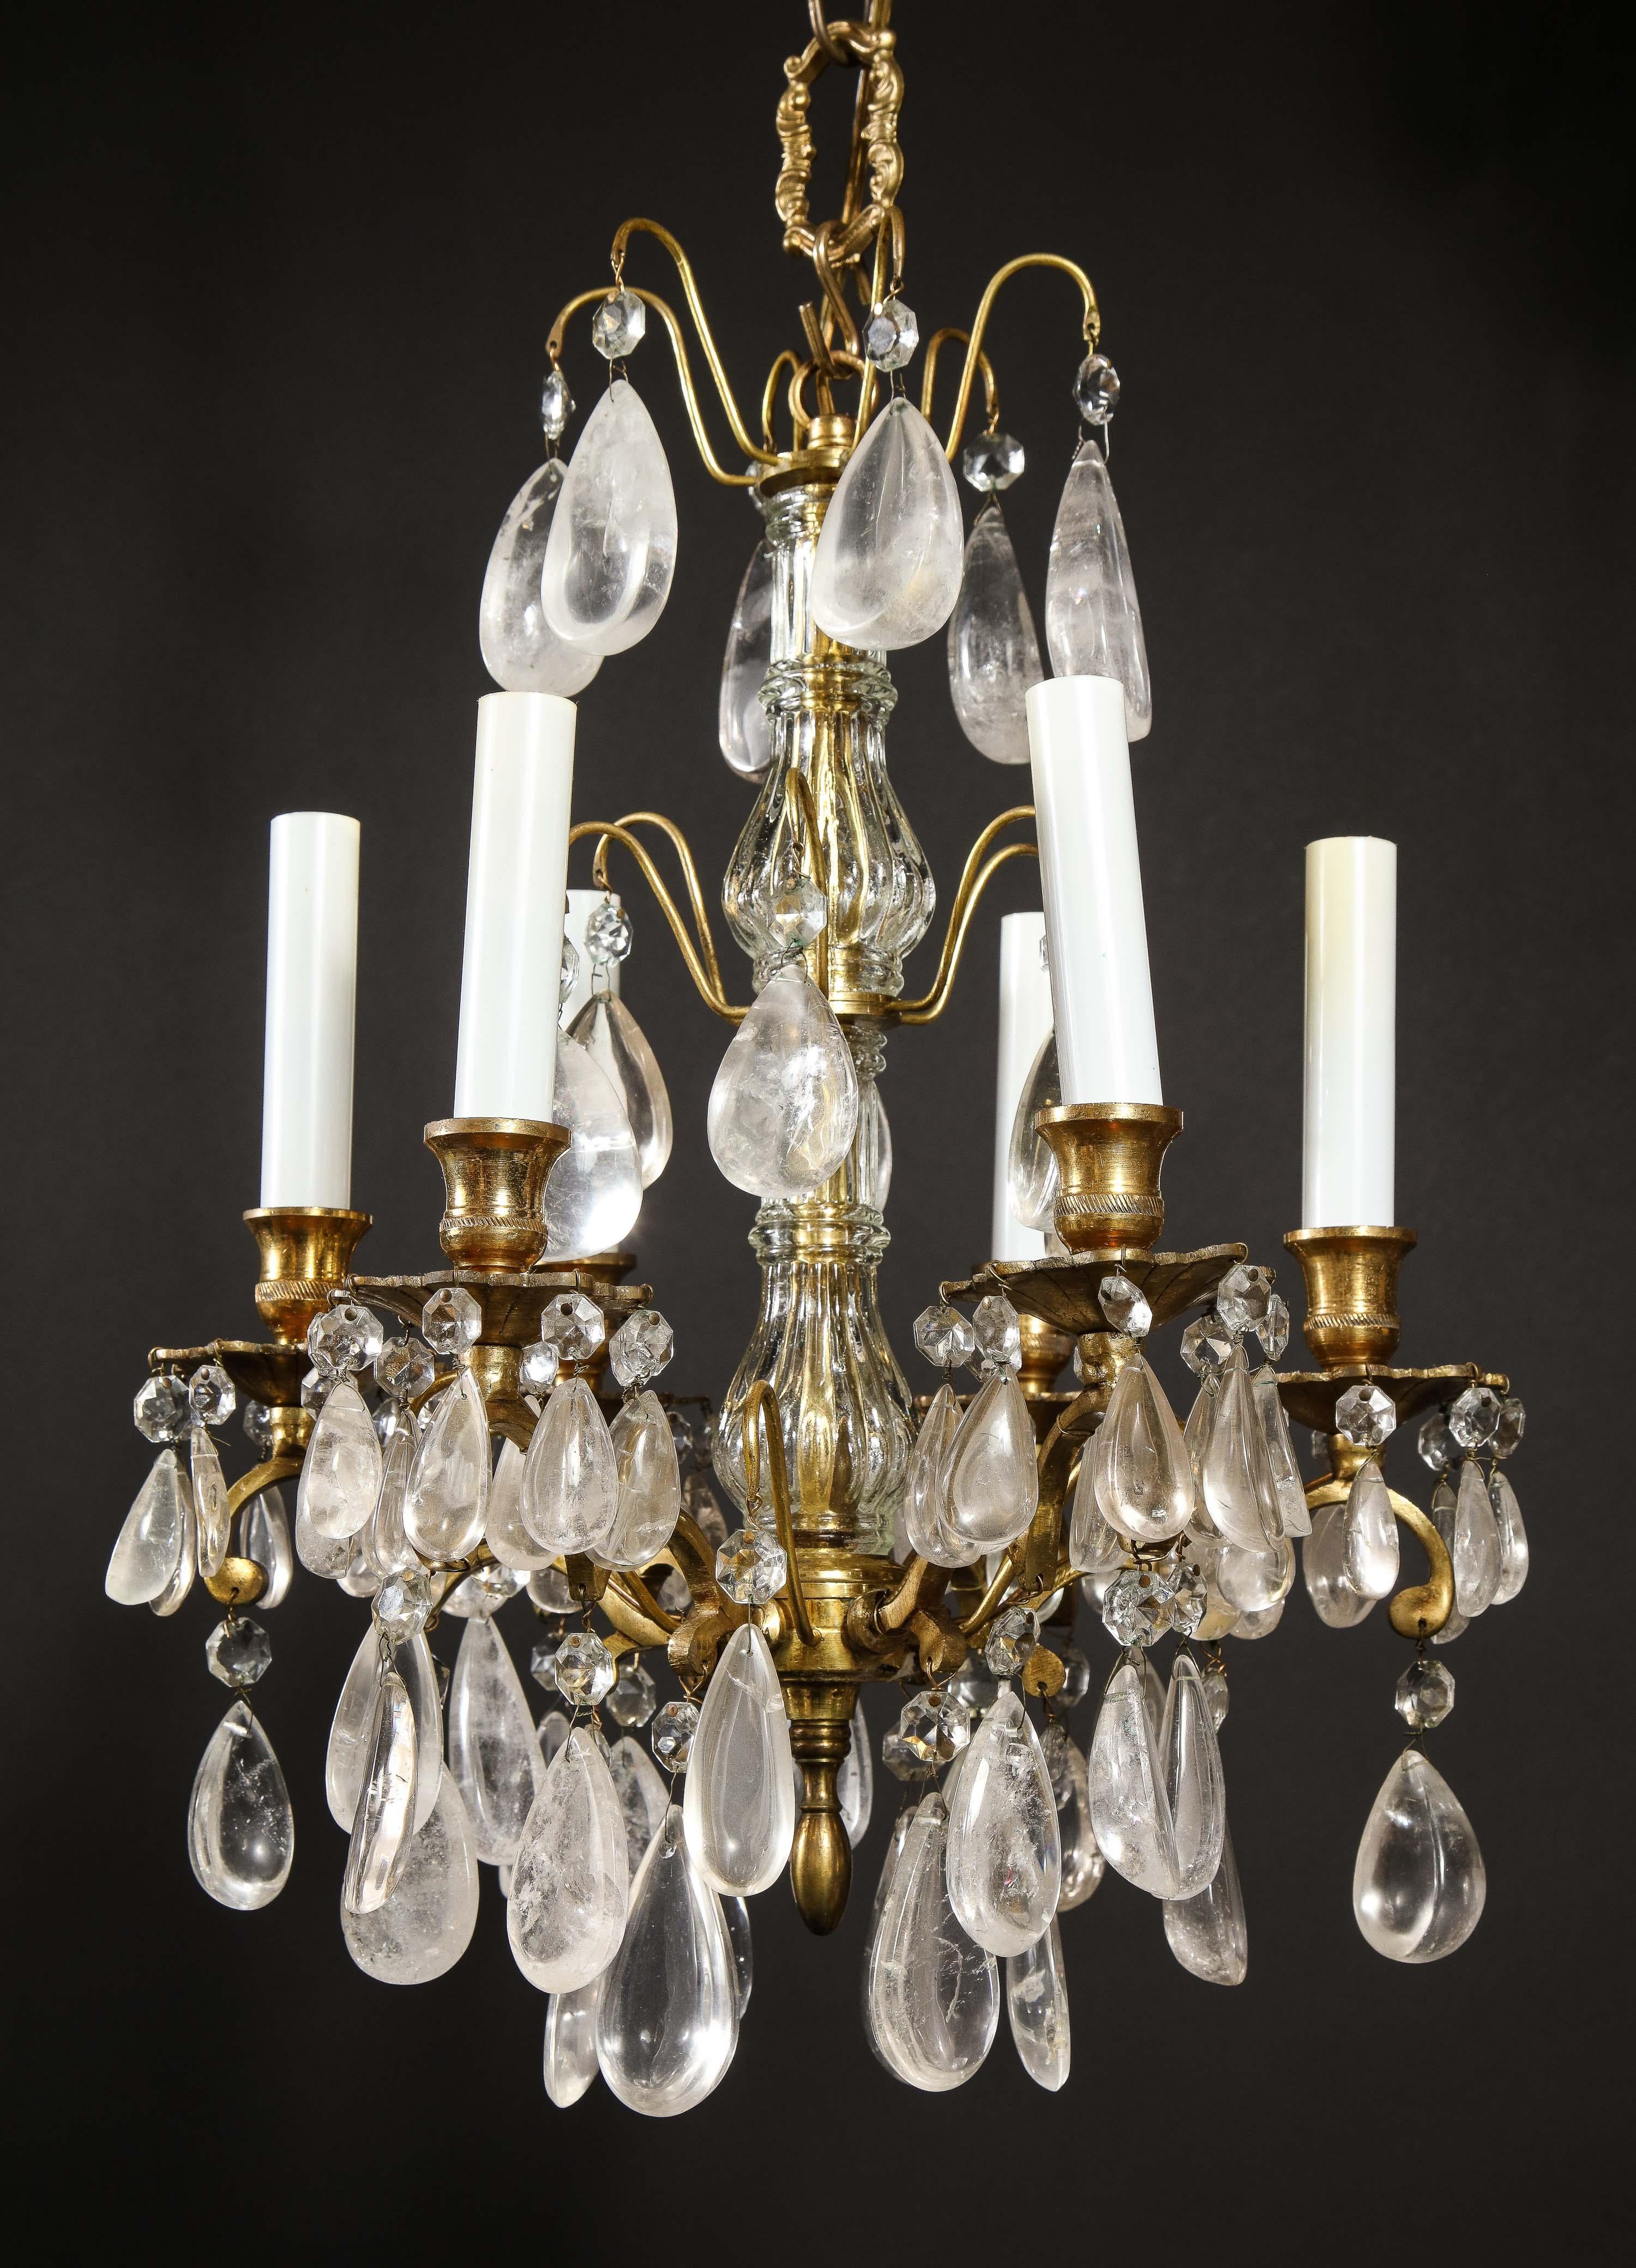 Pair of Fine Continental Louis XVI Style Rock Crystal Chandeliers 13